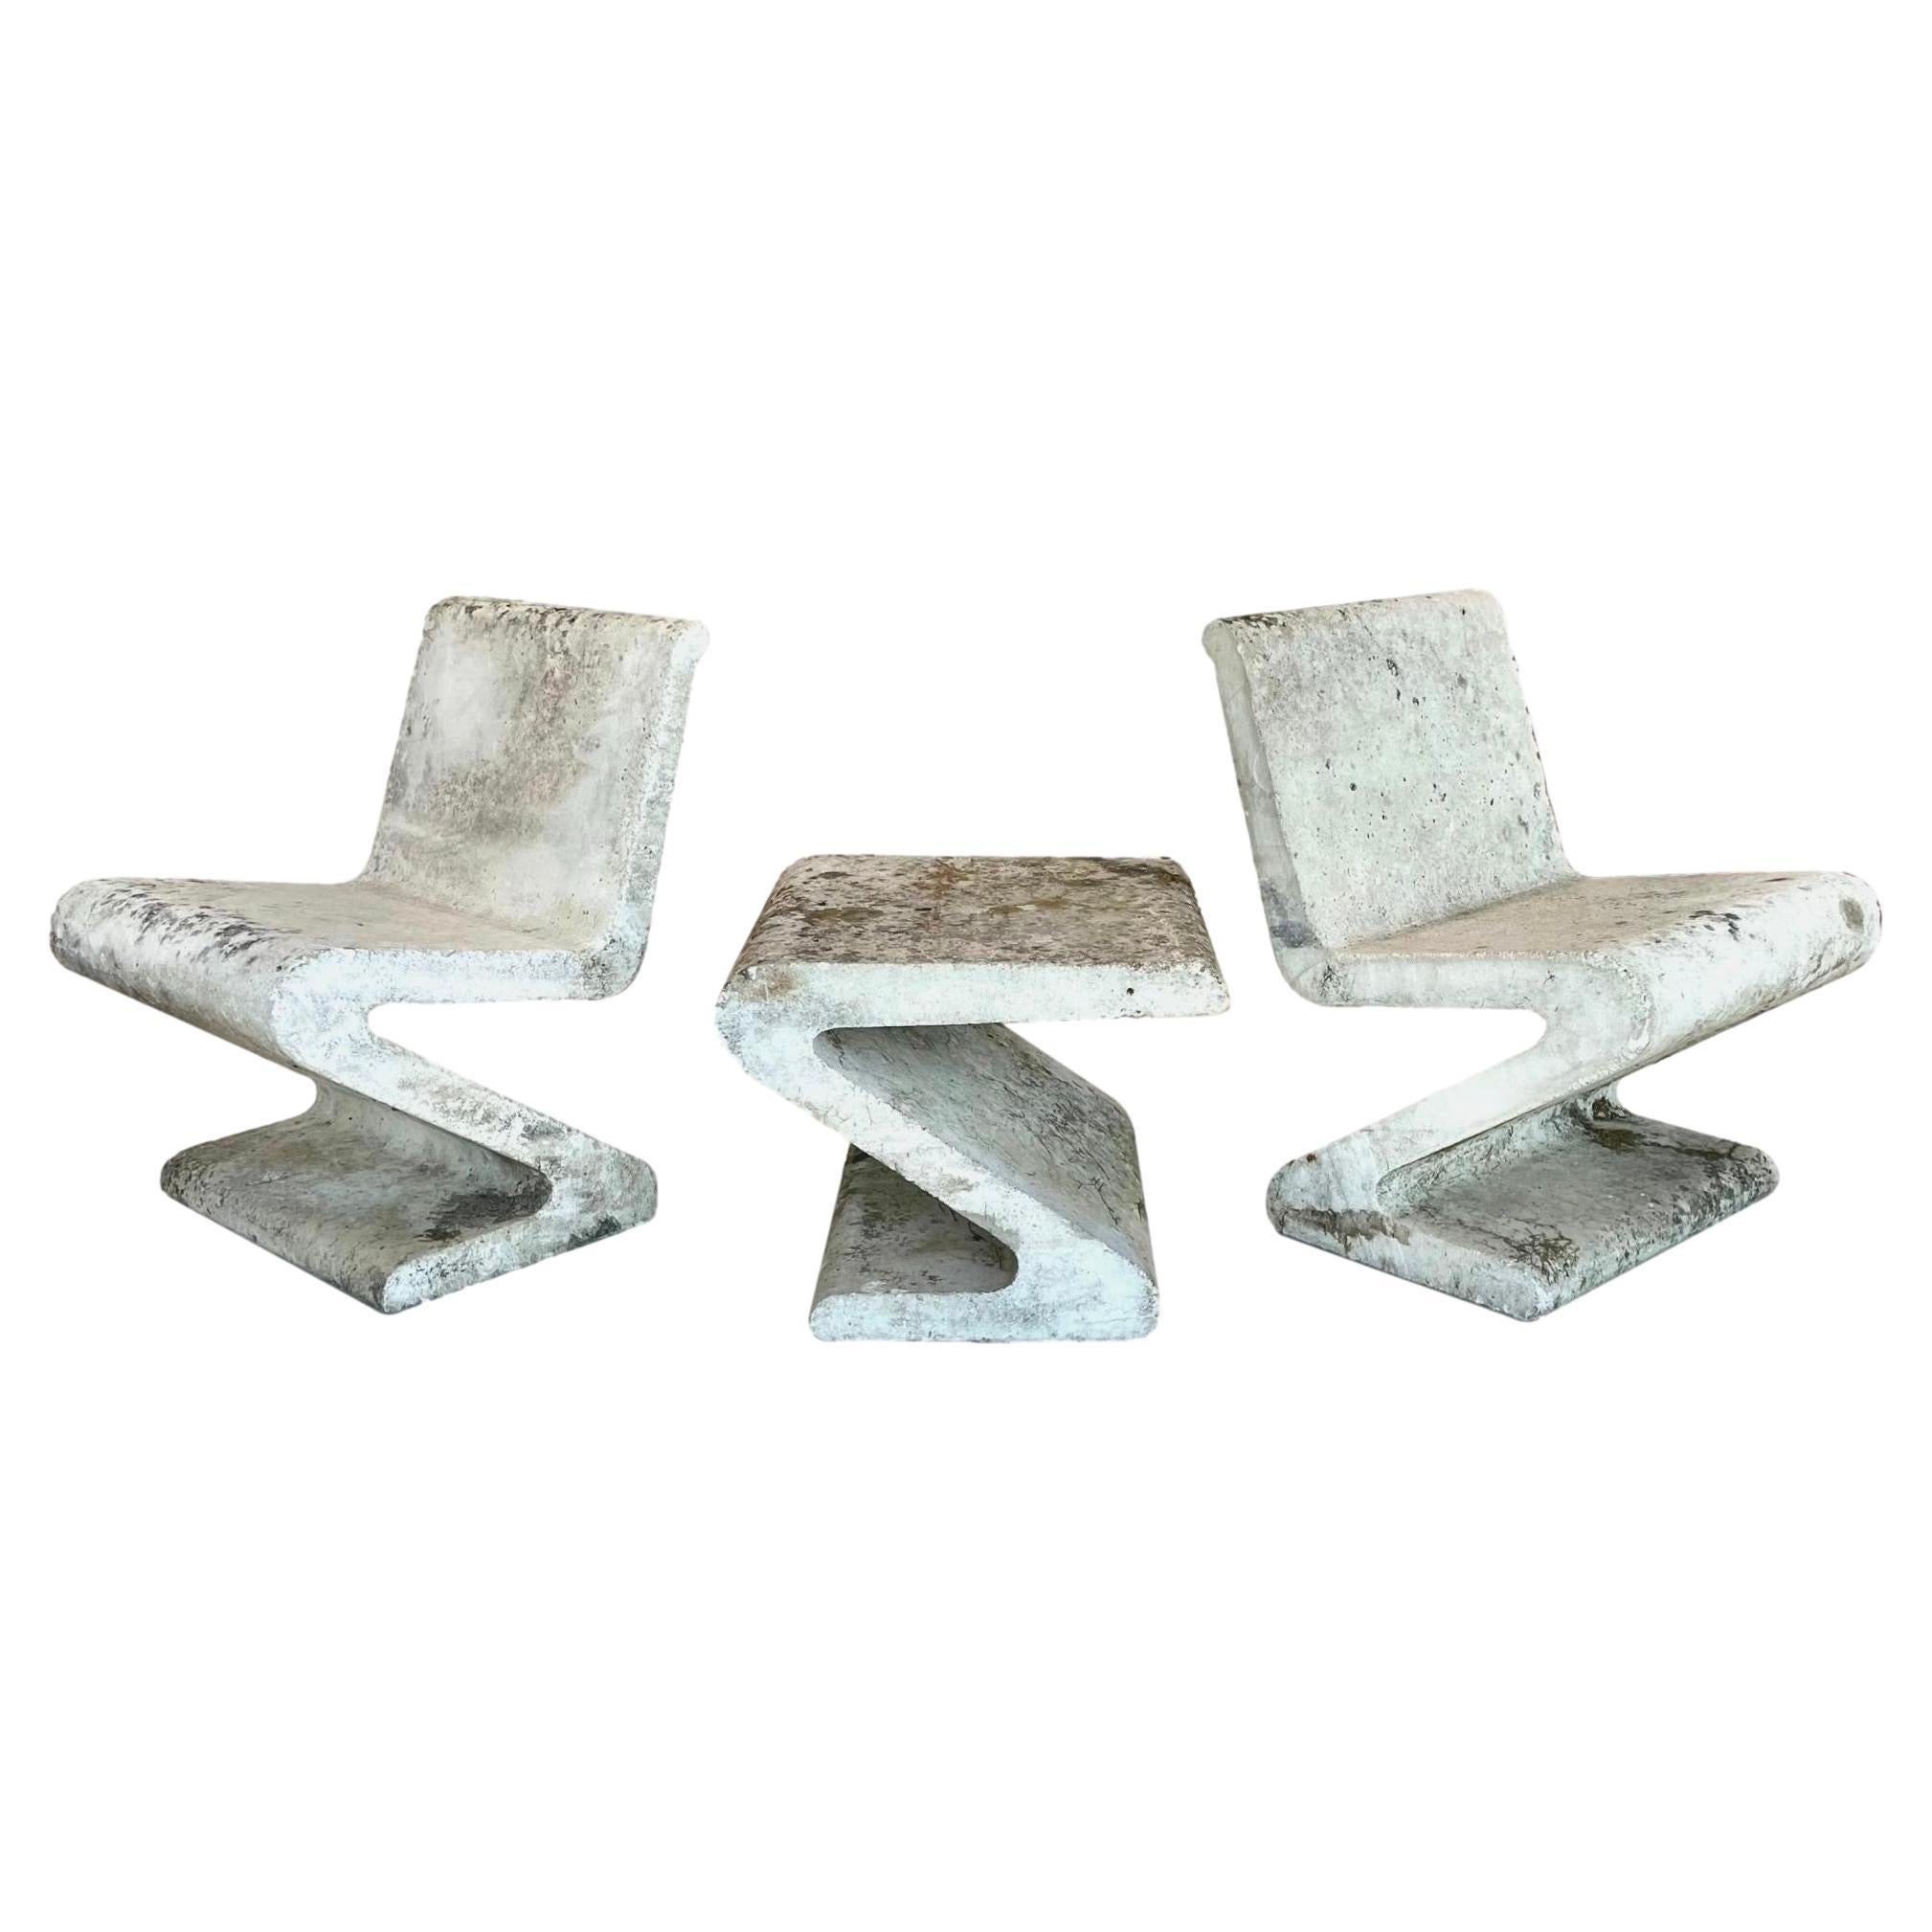 Sculptural Set of Concrete Zig Zag Chairs and Table, 1960s Switzerland